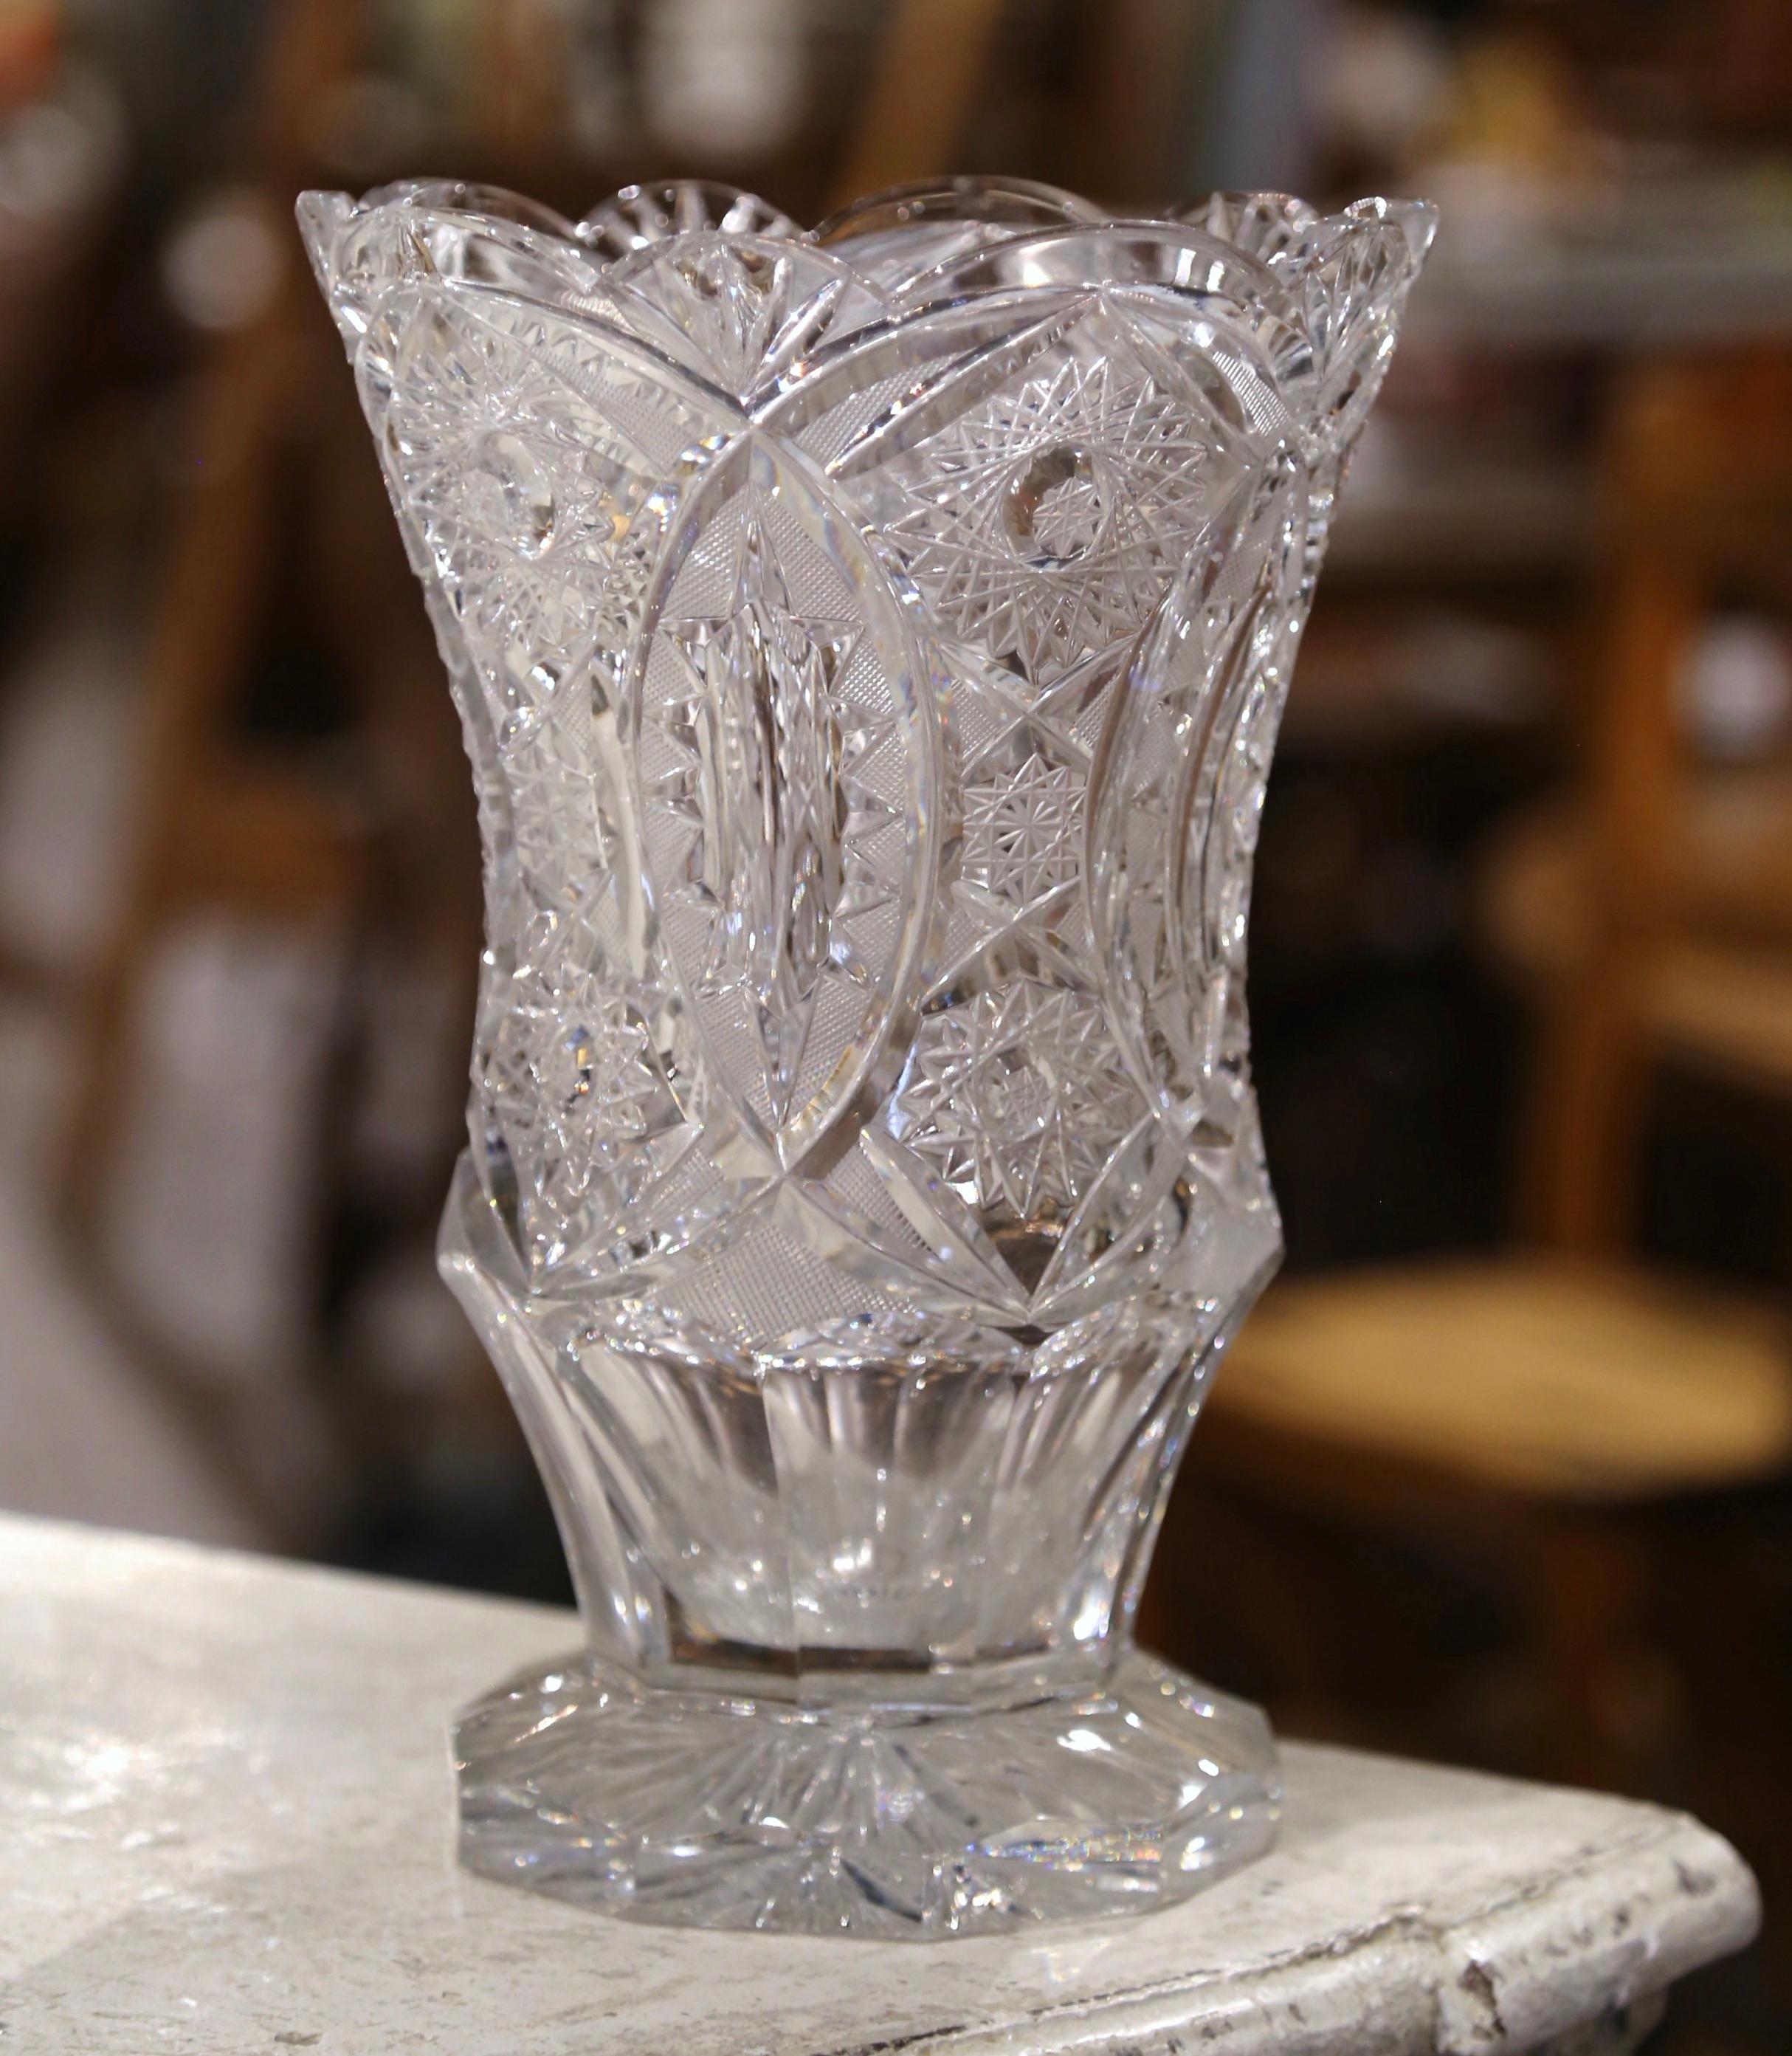 20th Century Mid-Century French Cut Crystal Vase with Etched Geometric and Floral Motifs For Sale